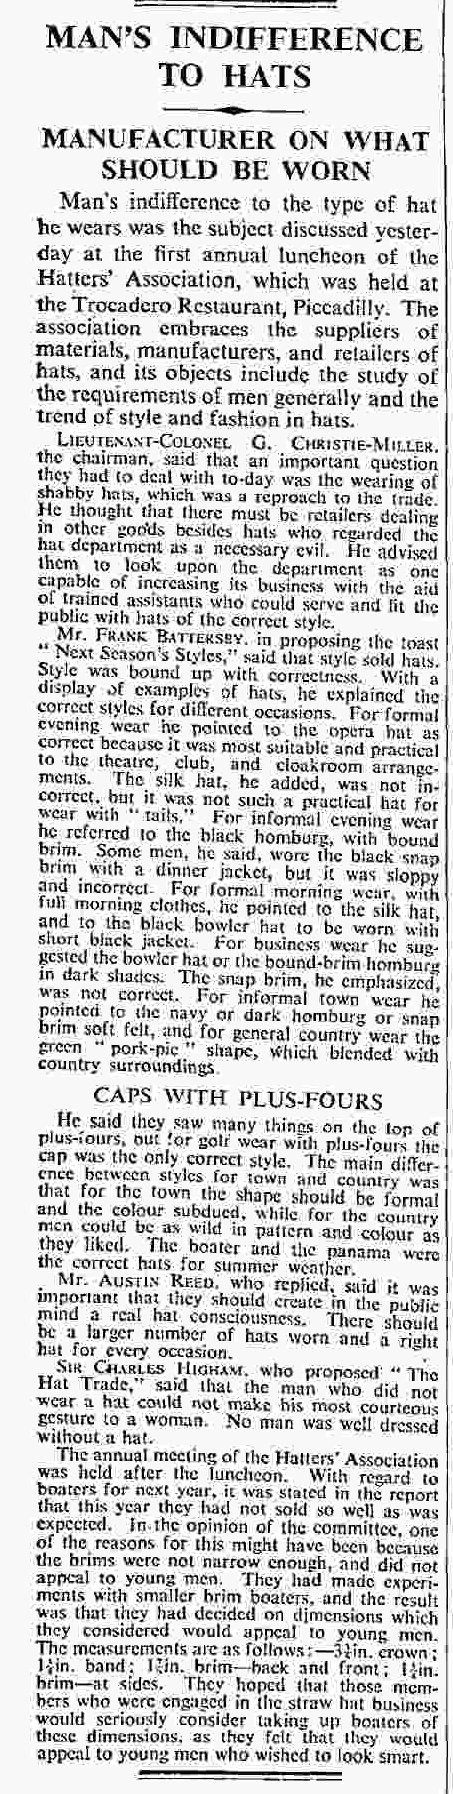 1934.11.28The_Times_1934-11-28 indifference.jpg